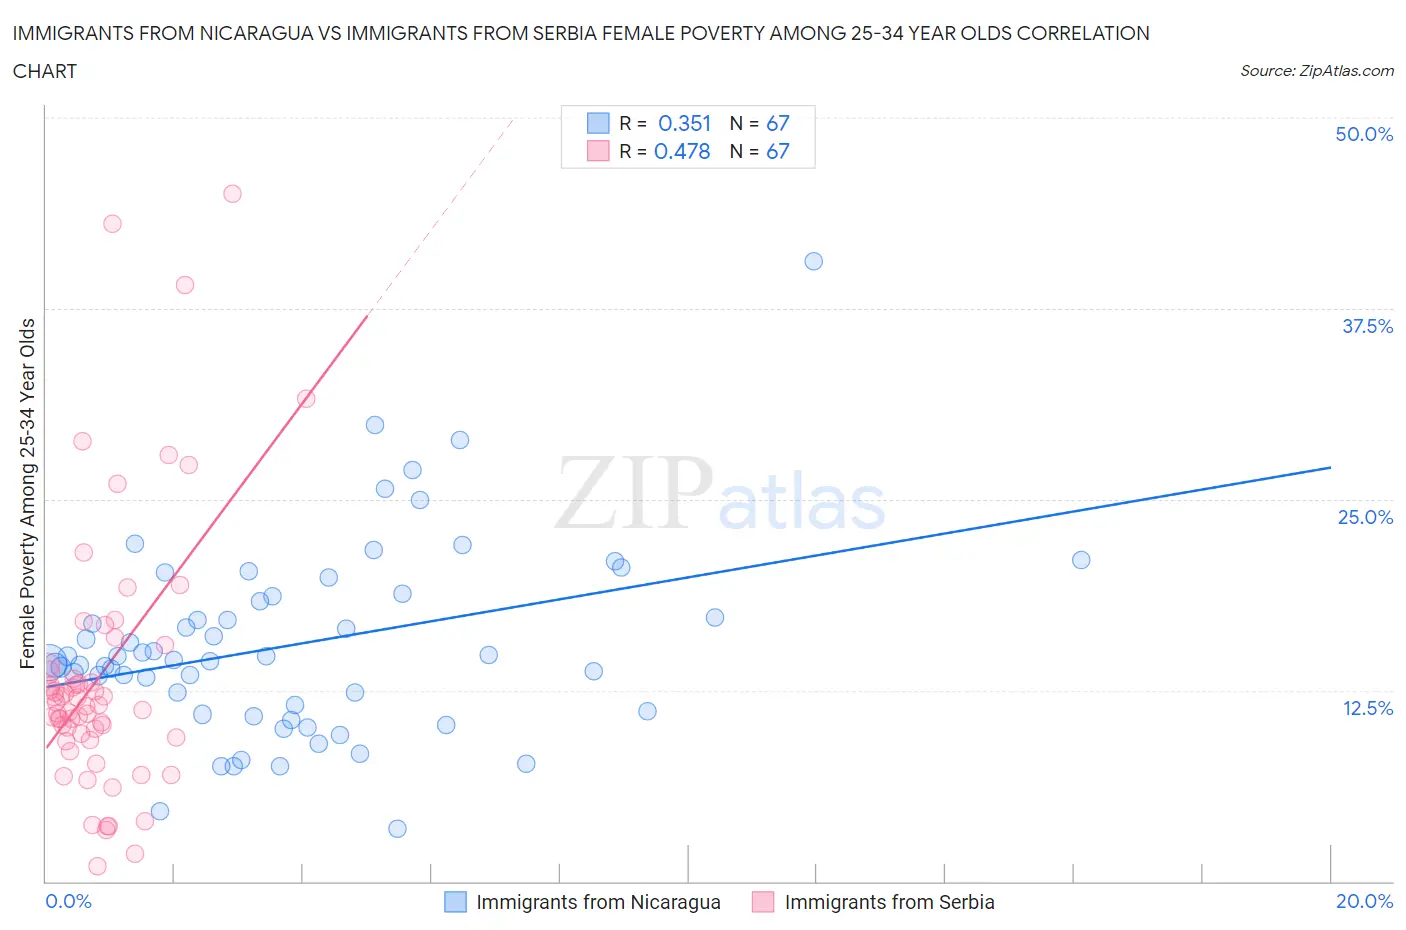 Immigrants from Nicaragua vs Immigrants from Serbia Female Poverty Among 25-34 Year Olds